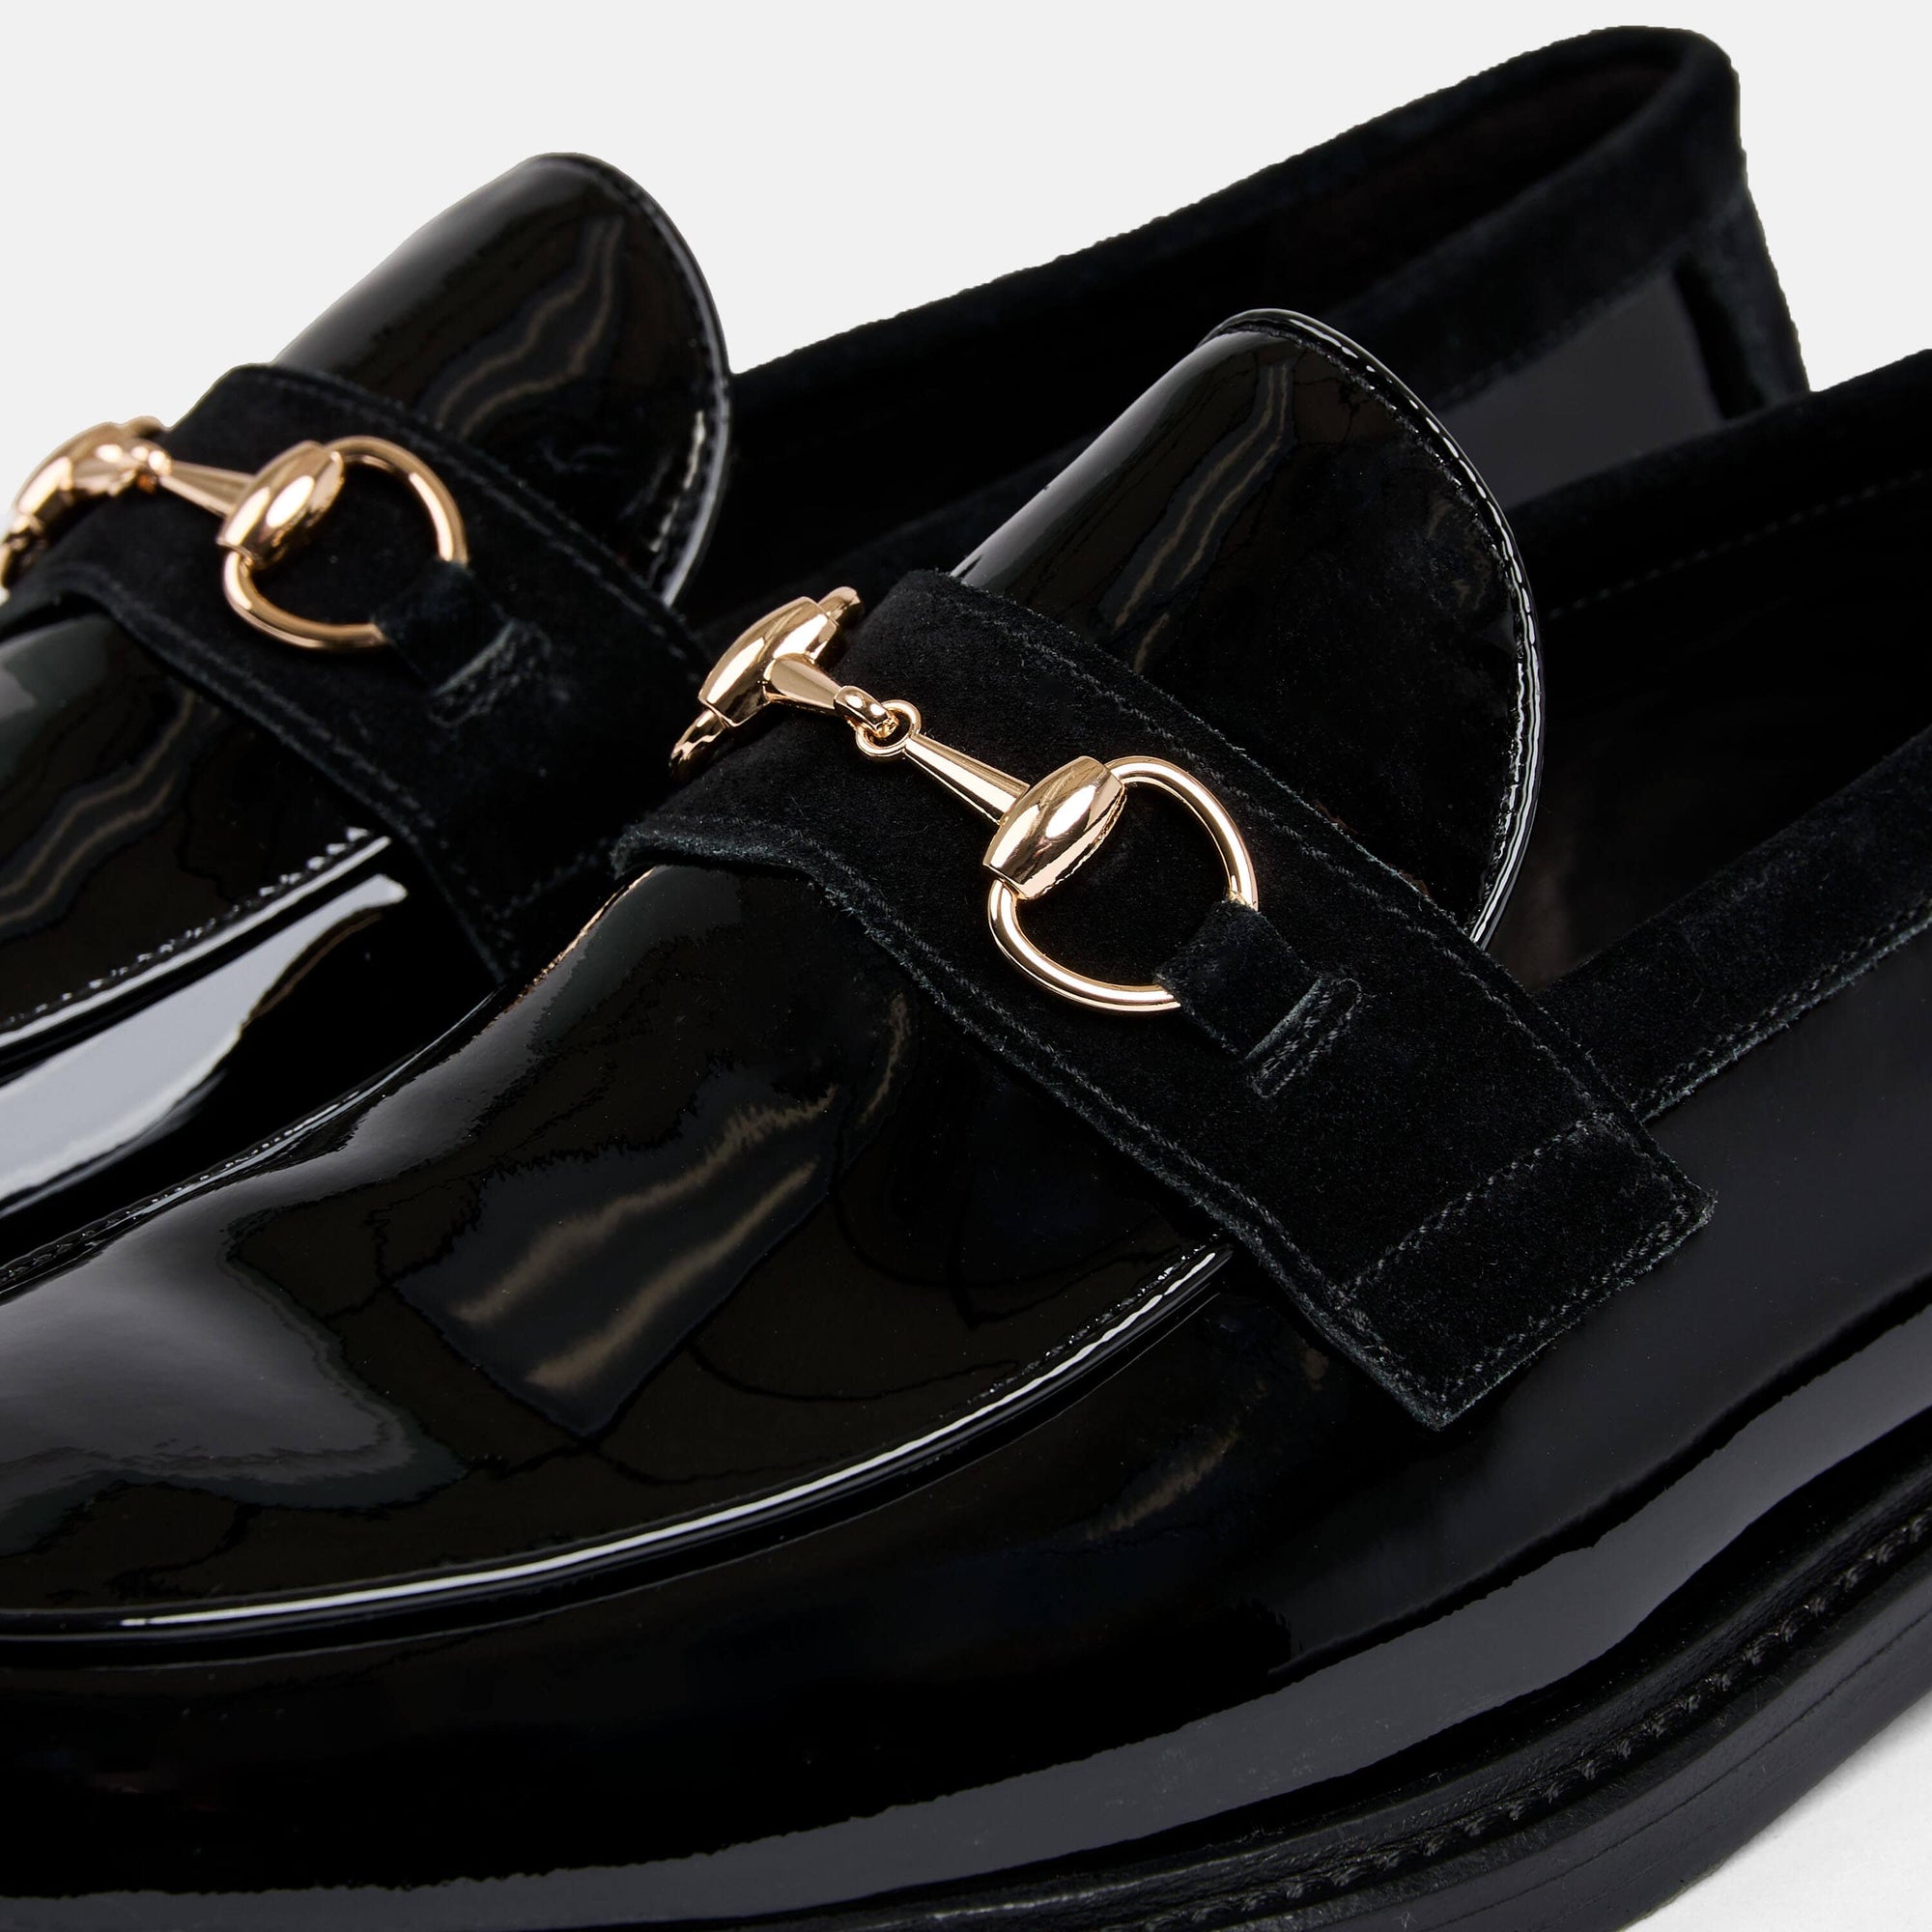 Adler Dark Green Patent Leather Penny Loafers - Leather - Size: 16 by Marc Nolan